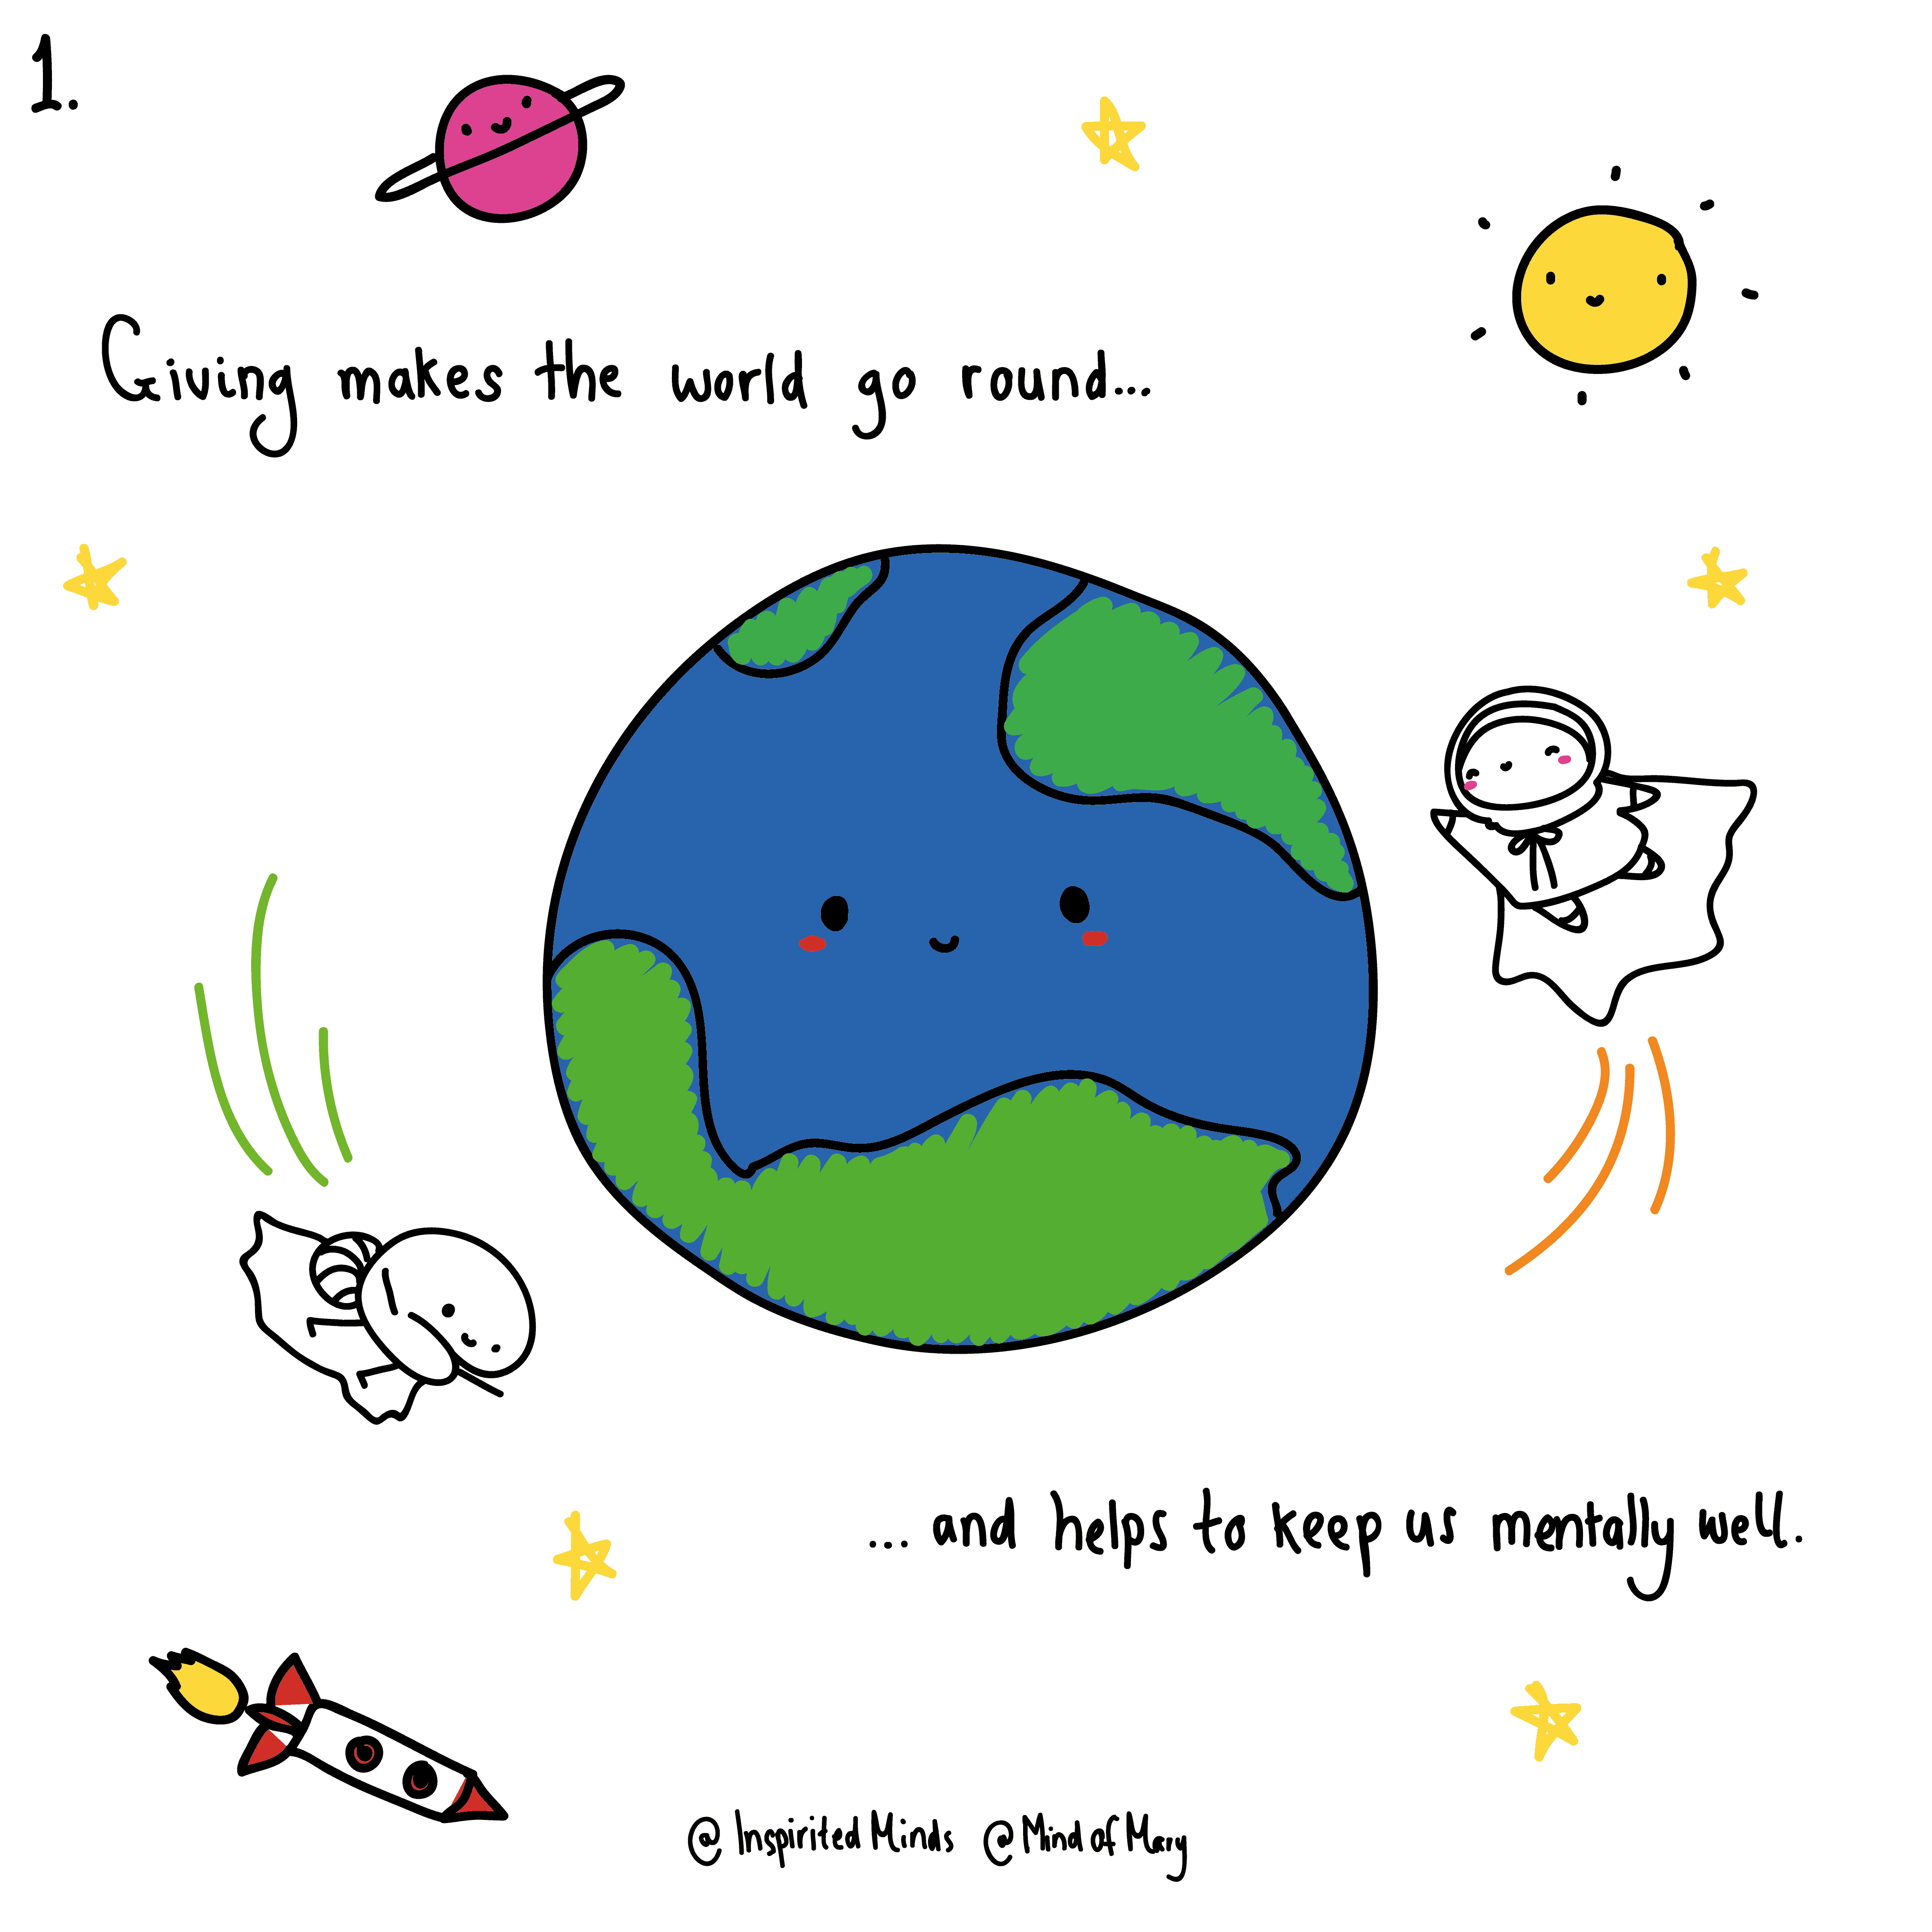 mindful-bubbles-doodle-1-giving-makes-the-world-go-round-1